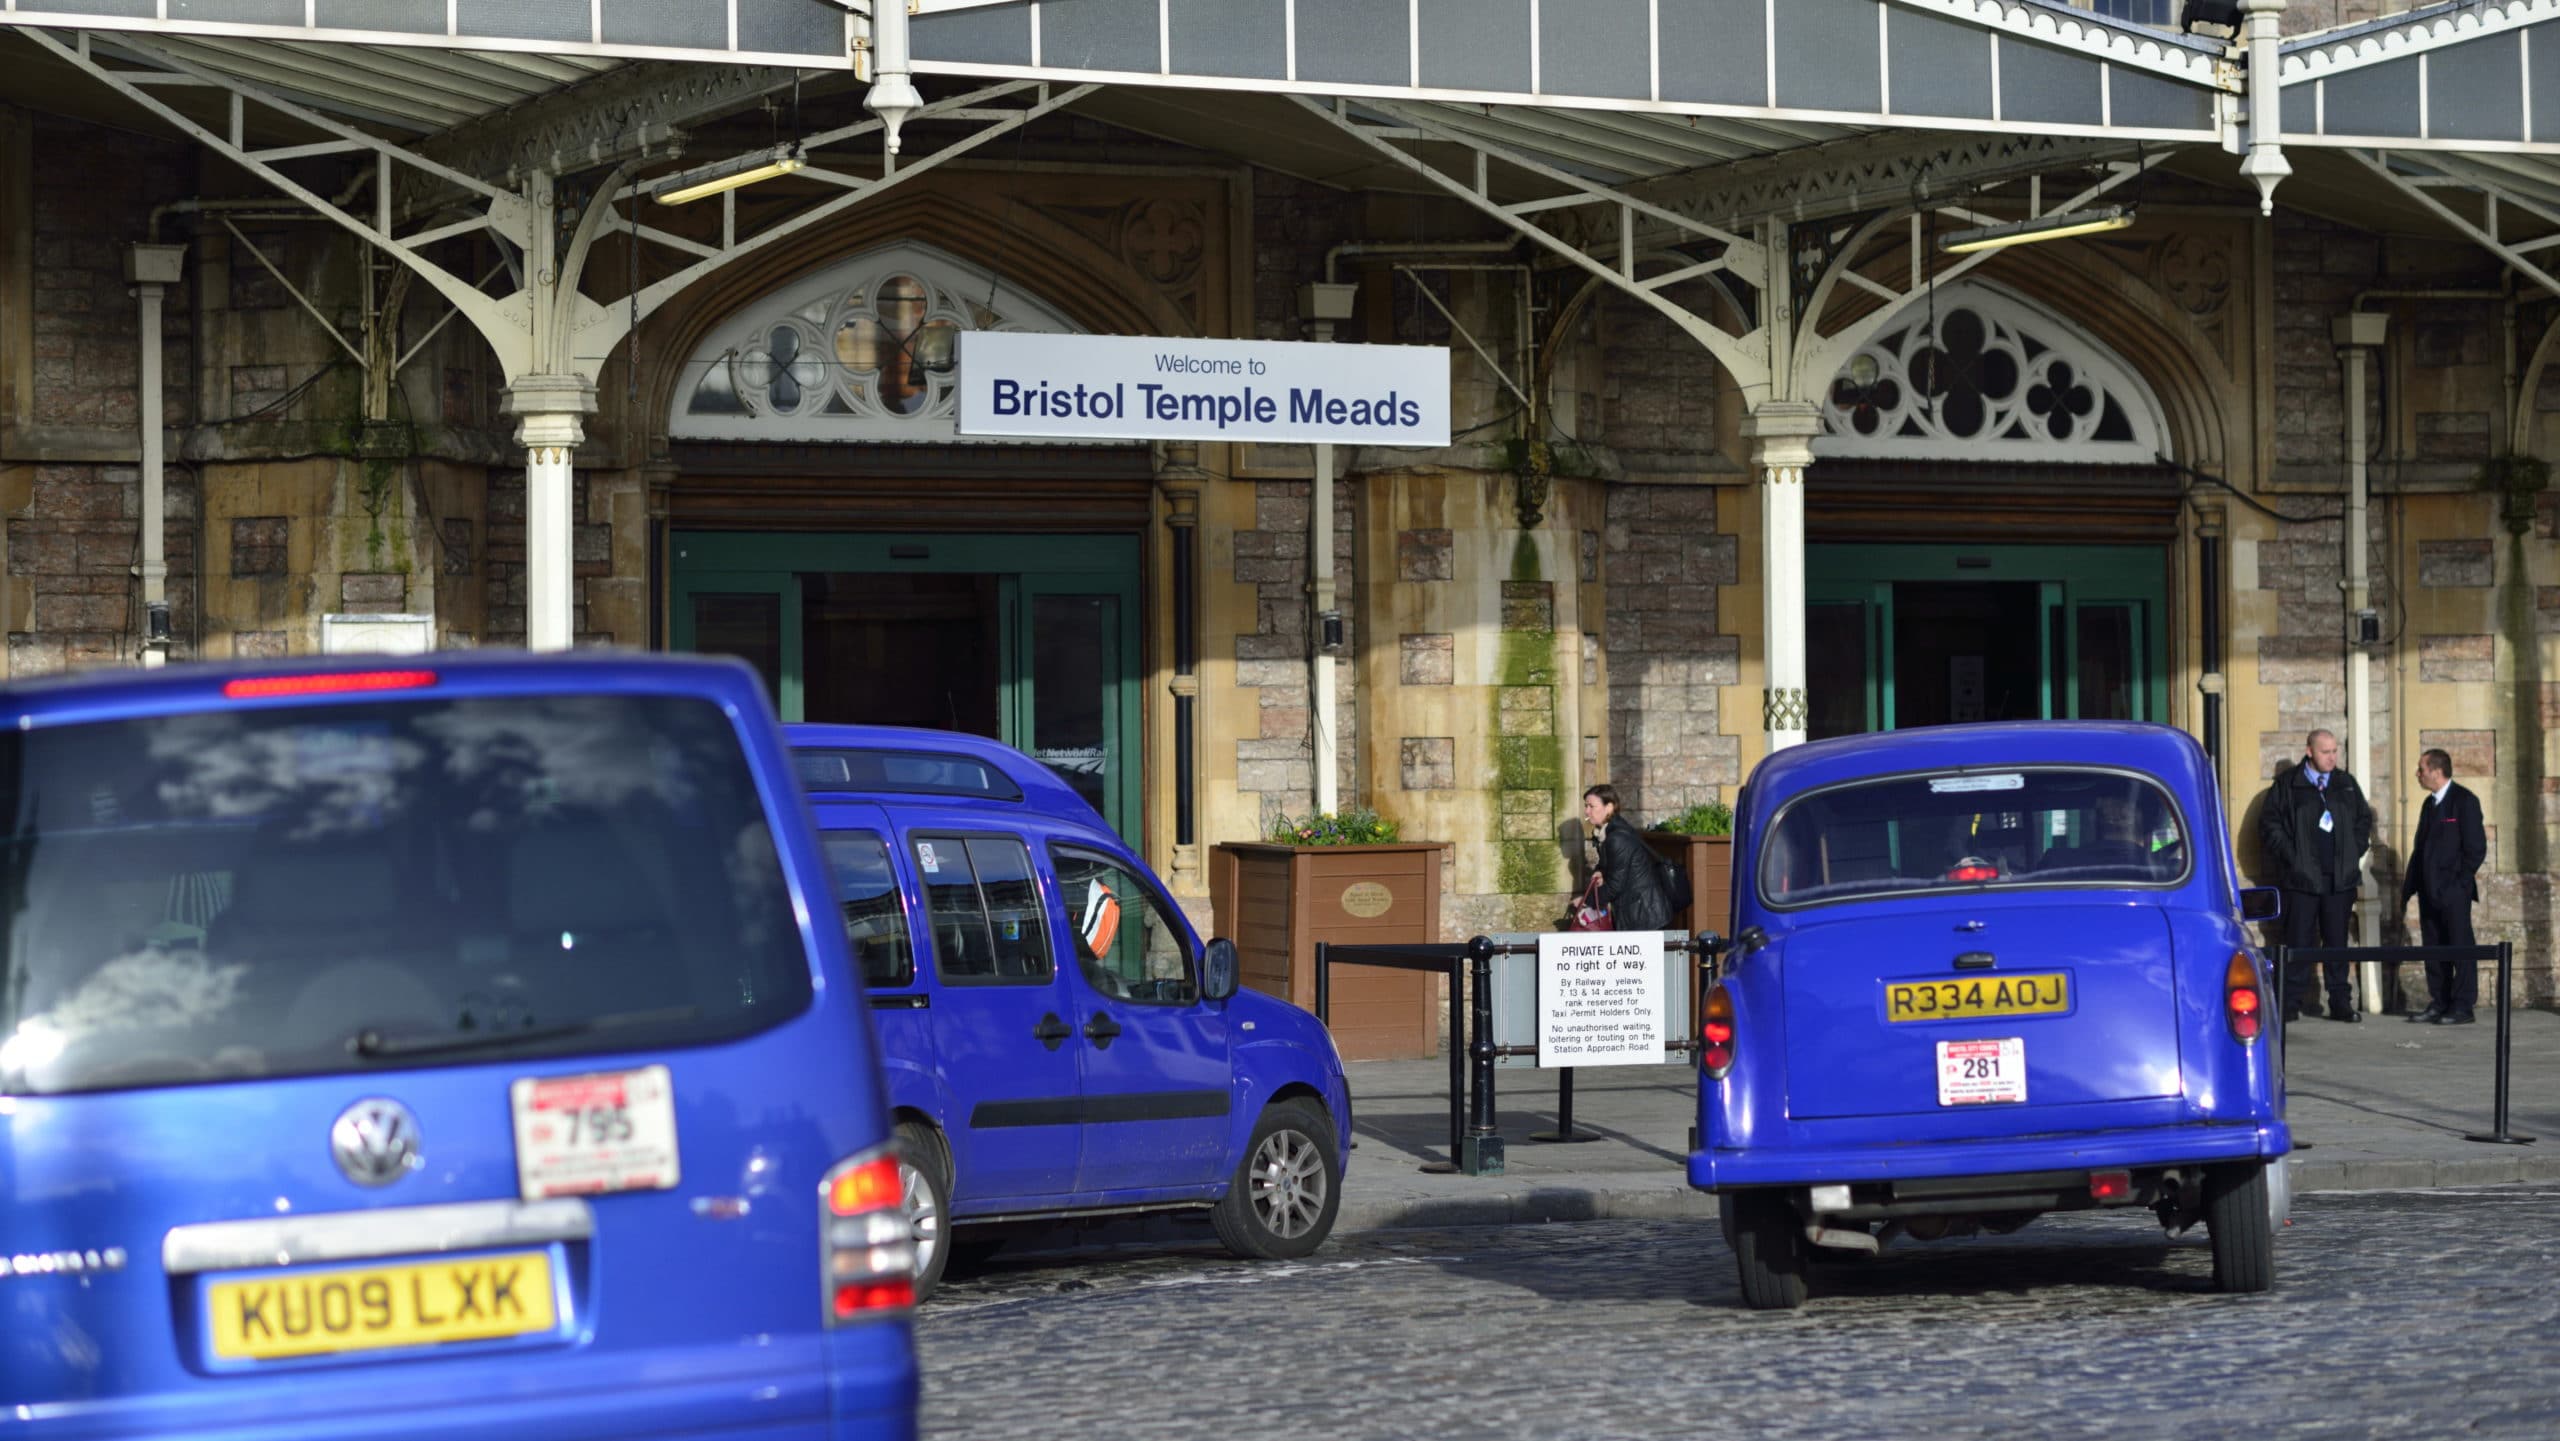 Hackney Carriages parked in front of the Bristol Temple Meads station